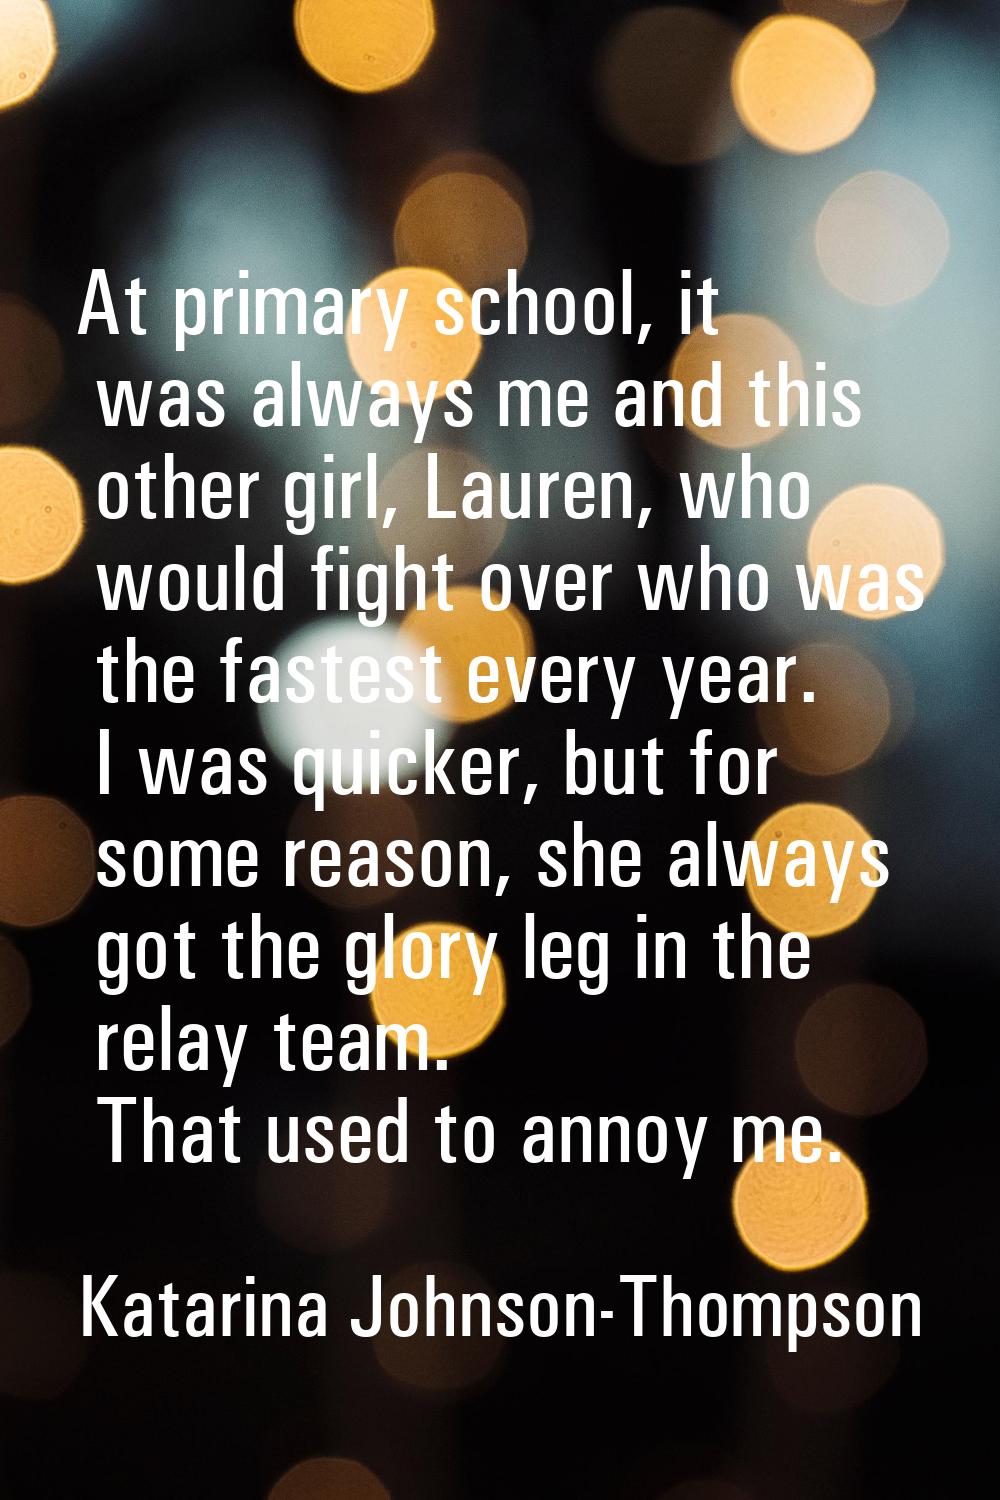 At primary school, it was always me and this other girl, Lauren, who would fight over who was the f